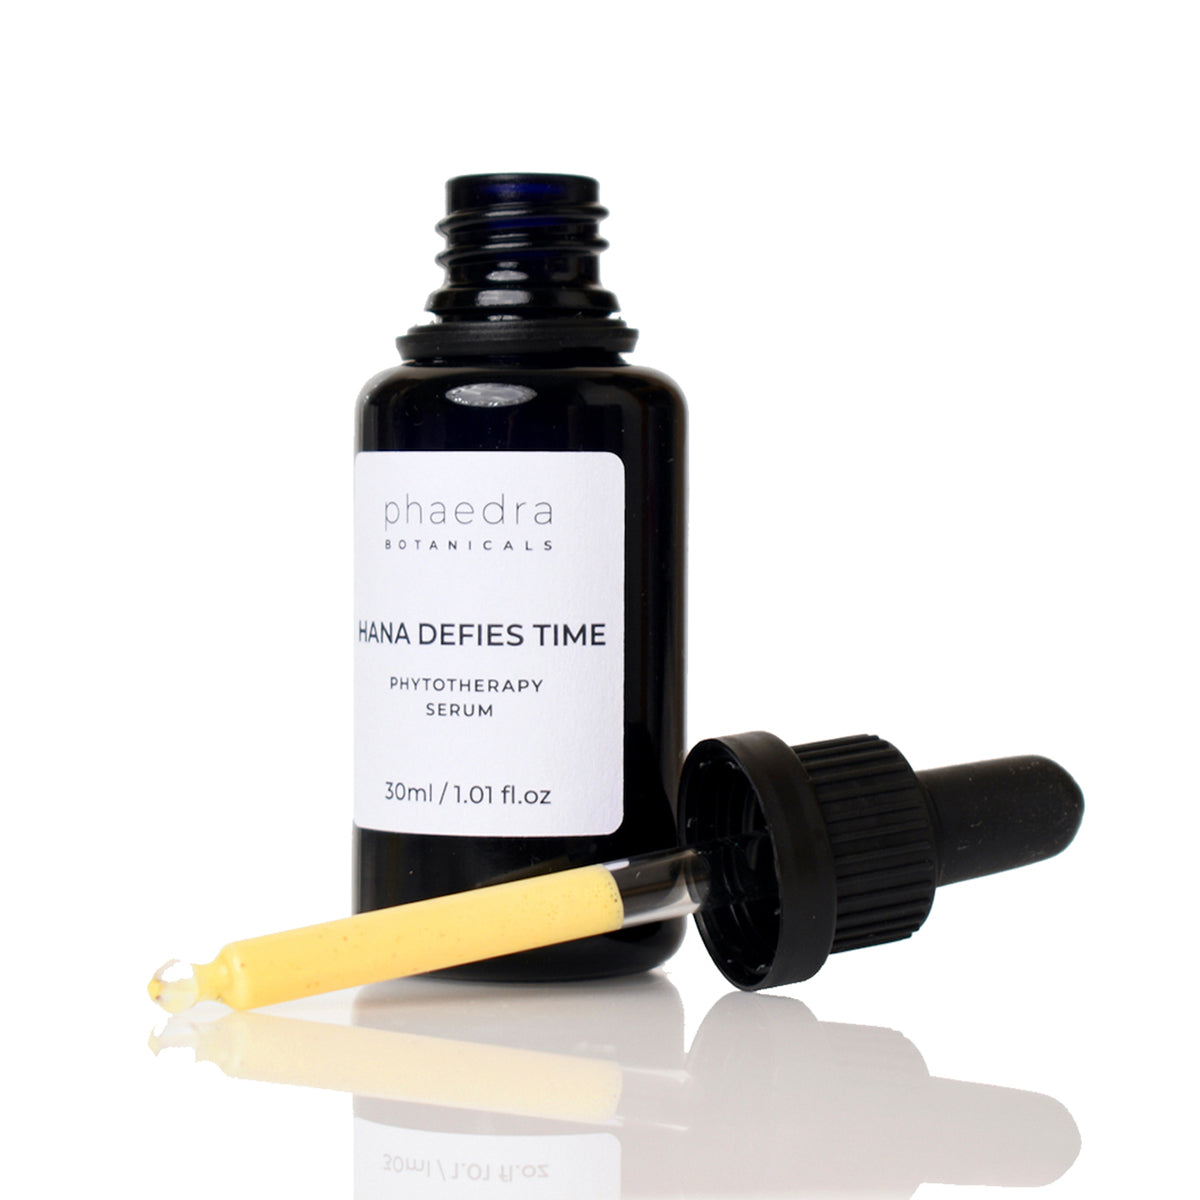 'hanna defies time' phytotherapy serum 30ml